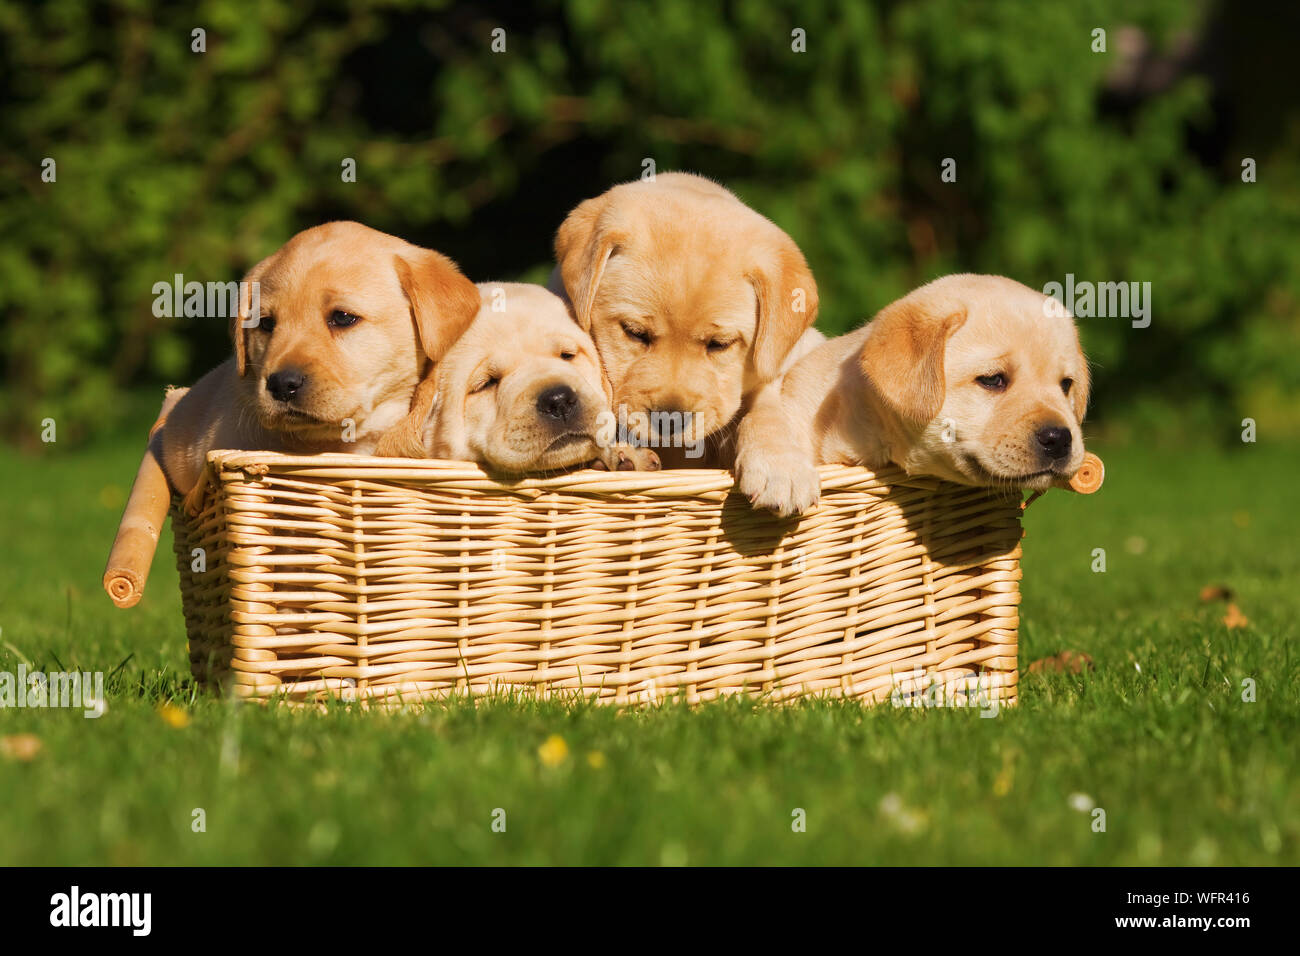 Puppies In A Basket Stock Photo - Alamy